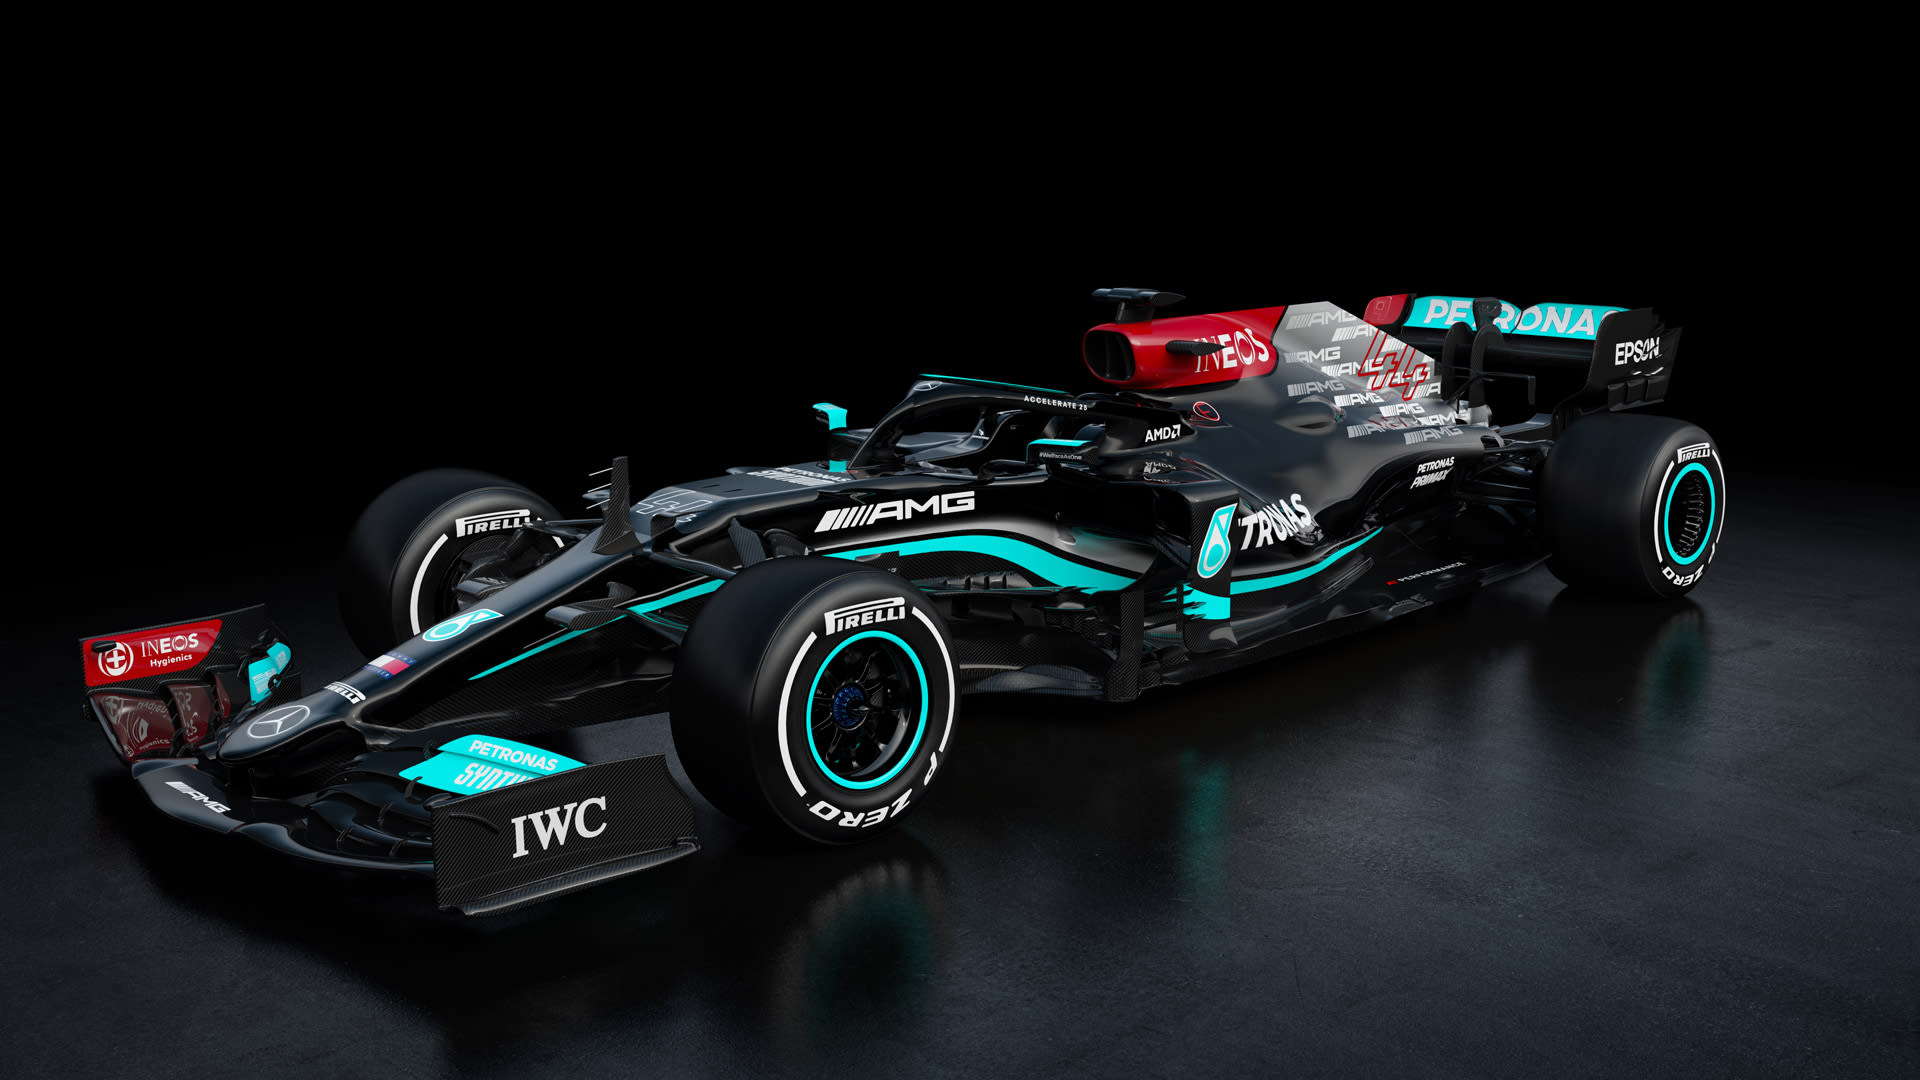 The 2022 Mercedes F1 Car Is a Silver Arrow Once More